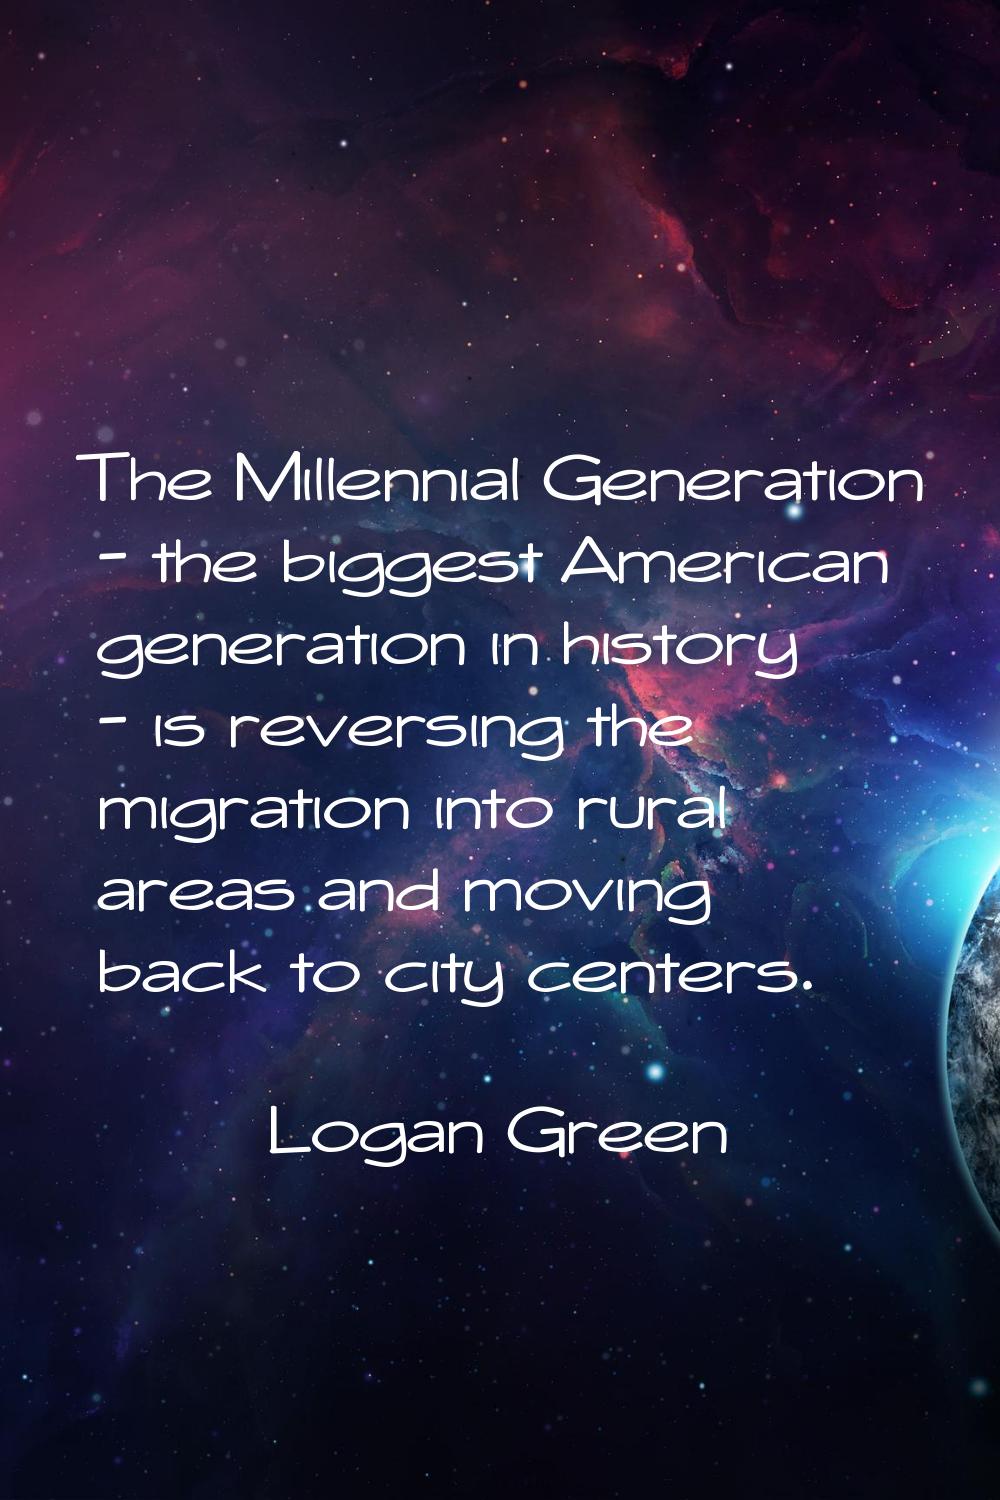 The Millennial Generation - the biggest American generation in history - is reversing the migration